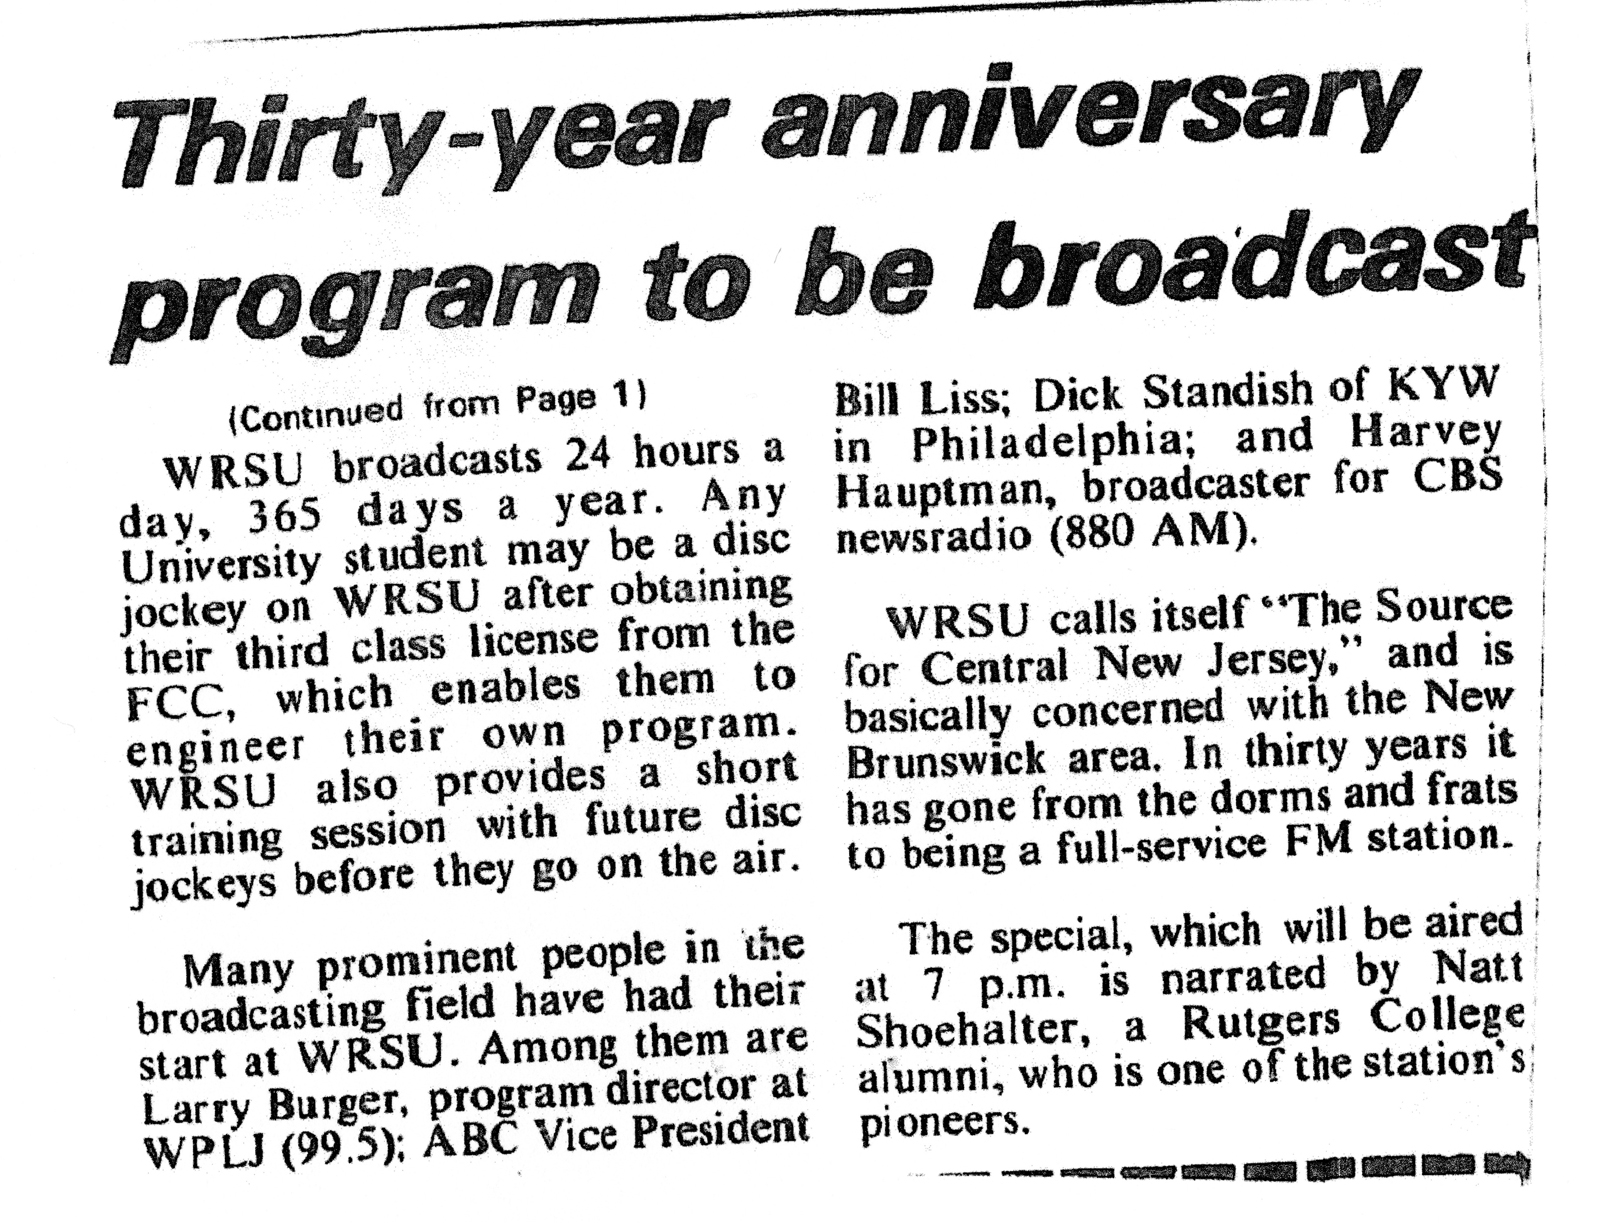 1978 Targum Notice concerning 30 Years on the Banks Program - Continued from page 1